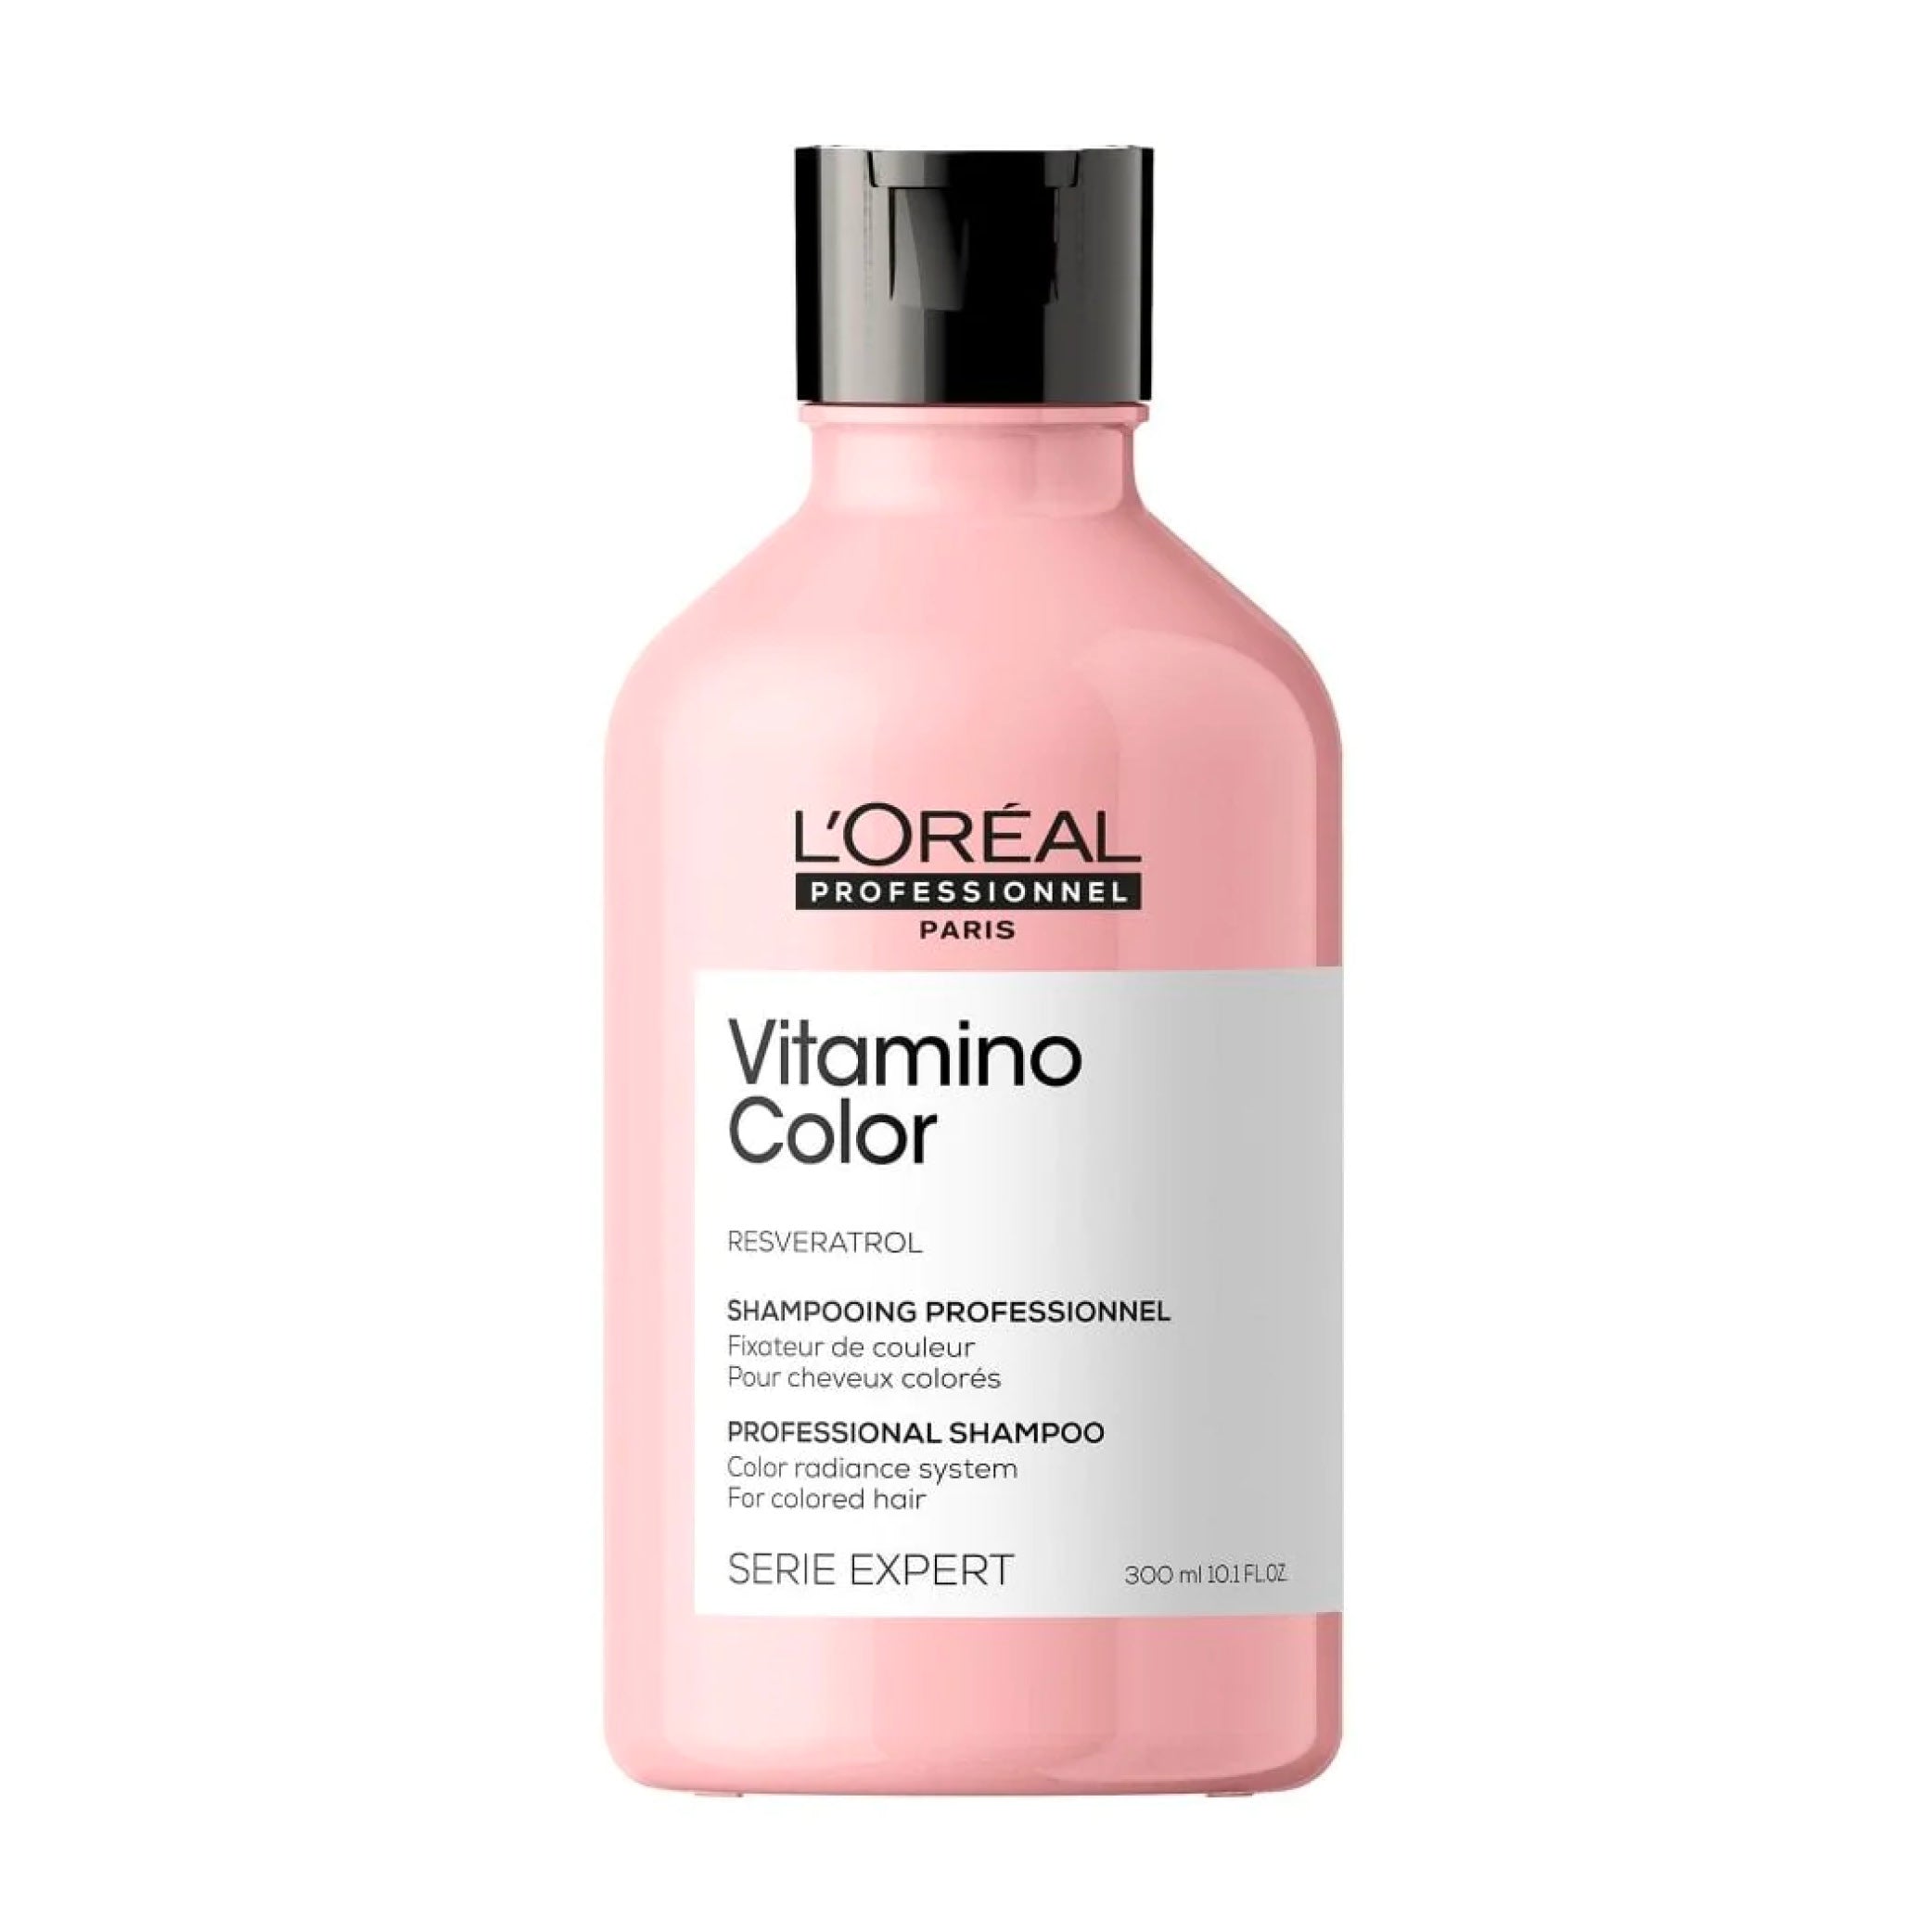 Vitamino Couleur Shampoing